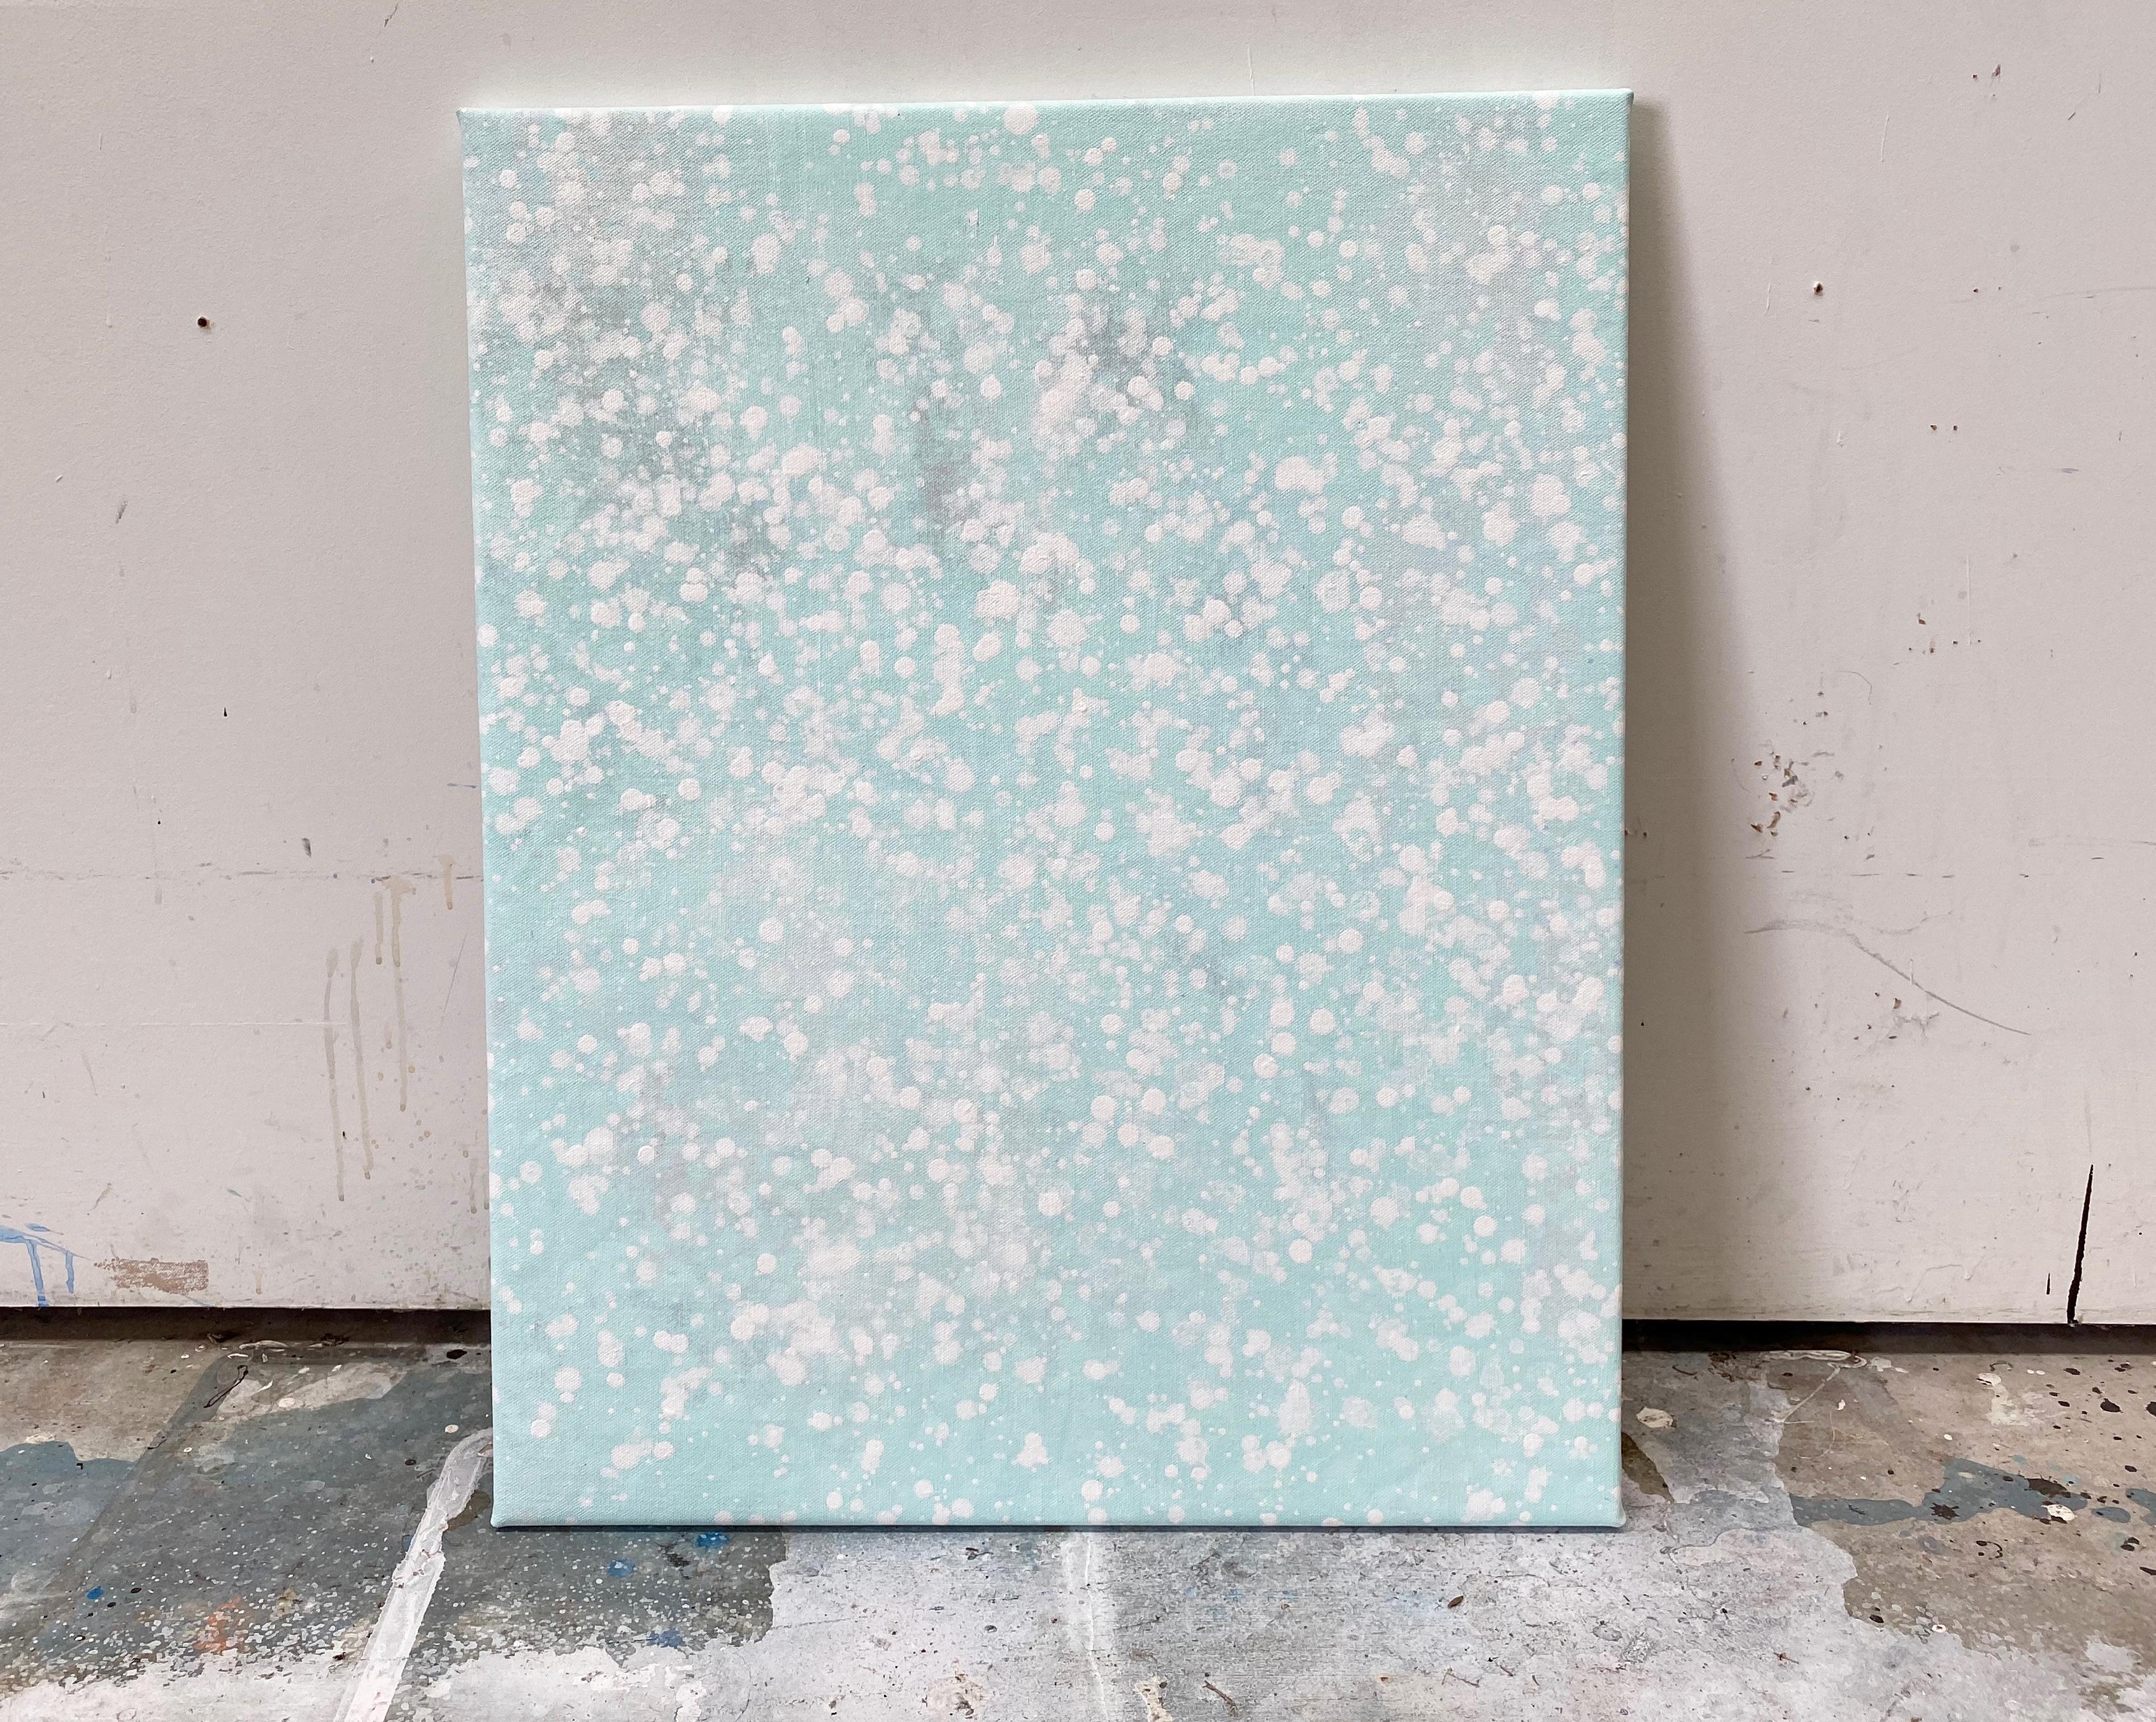 Its snowing pastel mint green dot abstract expressionist painting on linen - Painting by Kathleen Rhee